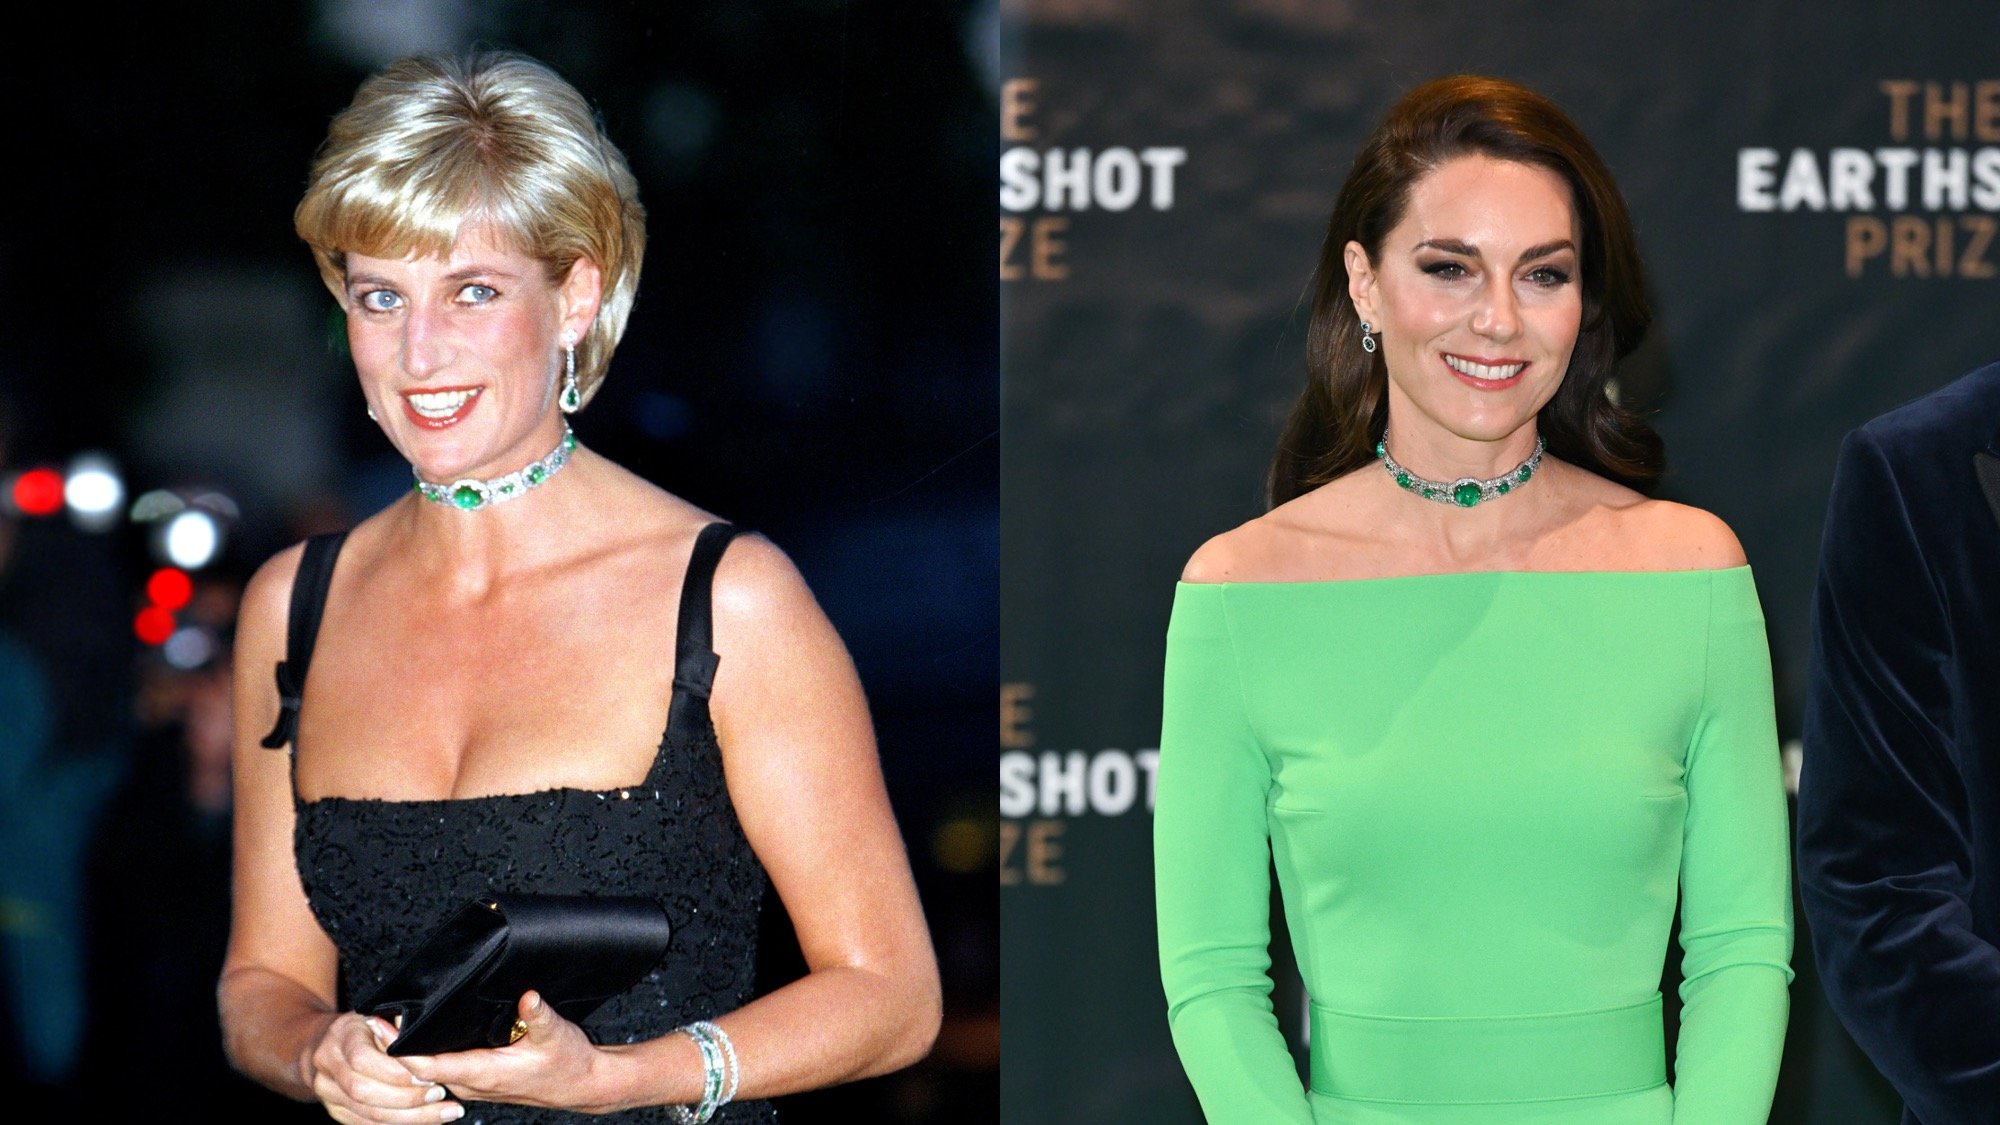 (L) Princess Diana at a Gala Dinner on her 36th birthday. (R) Kate Middleton, Princess of Wales, attends The Earthshot Prize 2022 at MGM Music Hall at Fenway on December 02, 2022, in Boston, Massachusetts.